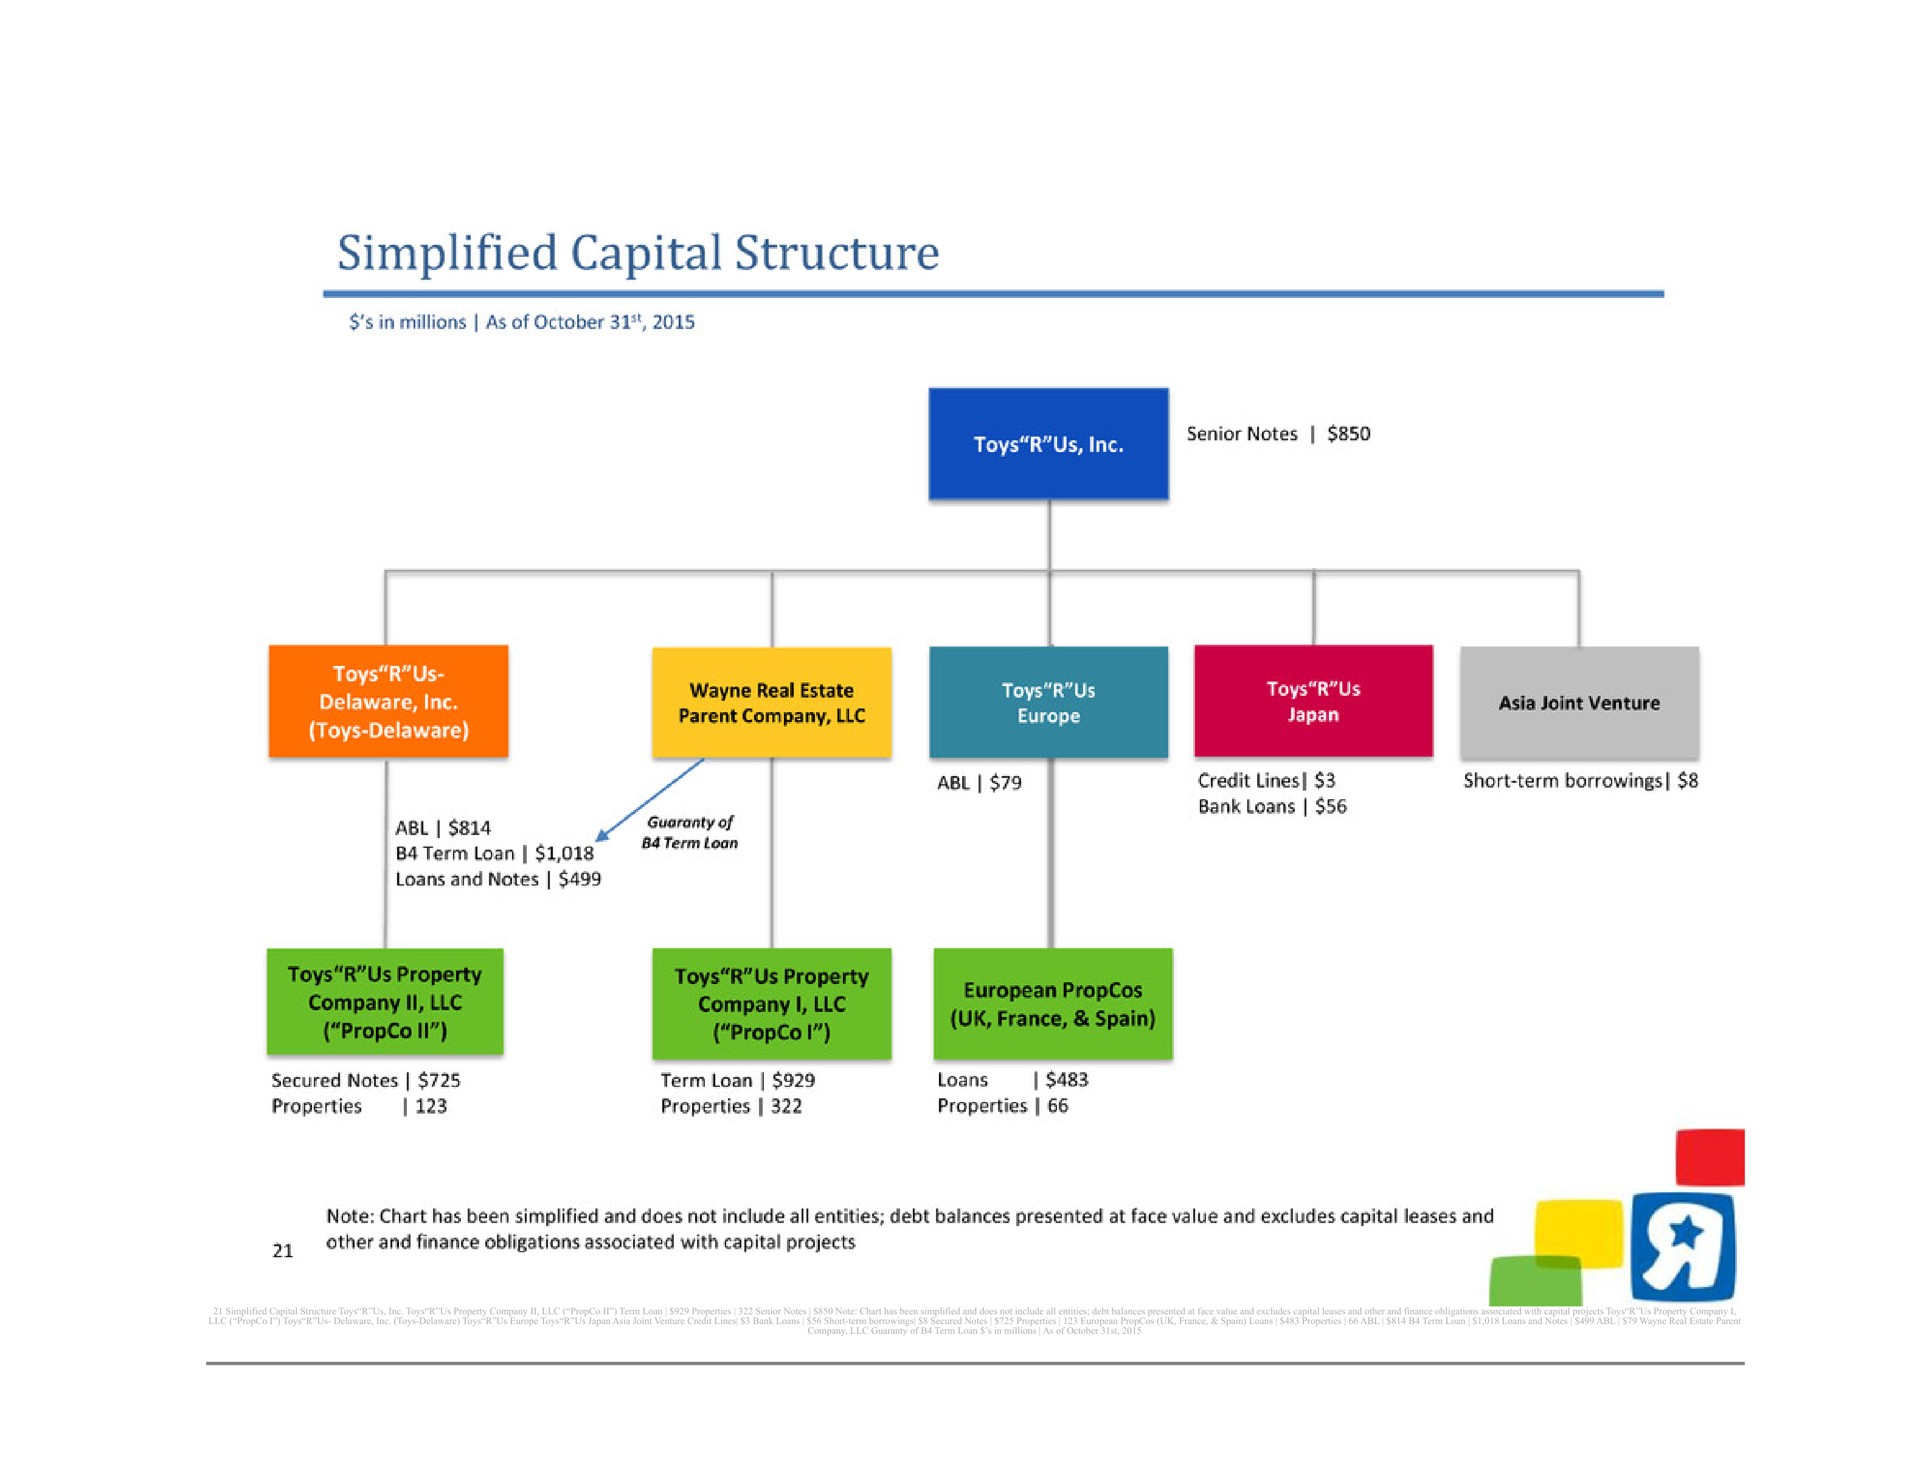 simplified capital structure toys us toys us property company term loan properties senior notes note chart has been simplified and does not include all entities debt balances presented at face value and excludes capital leases and other and finance obligations associated with capital projects toys us property company i i toys us toys toys us toys us japan joint venture credit lines bank loans short term borrowings secured notes properties loans properties term loan loans and notes real estate parent company guaranty of term loan in millions as of | Toys R Us